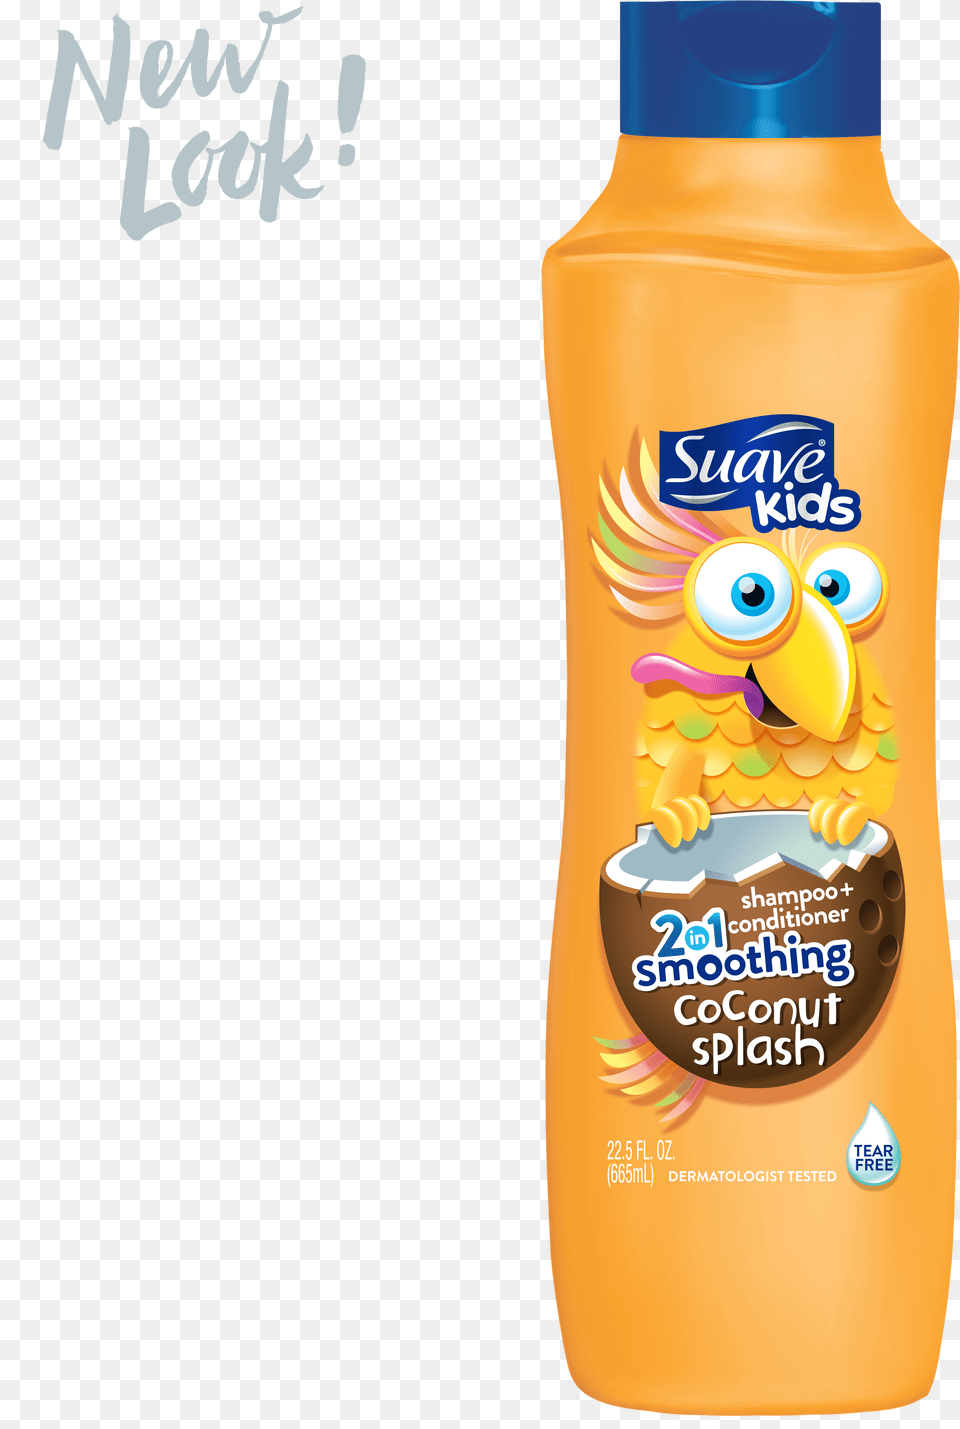 Suave Kids Cowabunga Coconut Smoothers 2 In 1 Shampoo Suave Kids 2 In 1 Smoothing Coconut Splash, Bottle, Shaker, Cosmetics, Sunscreen Free Png